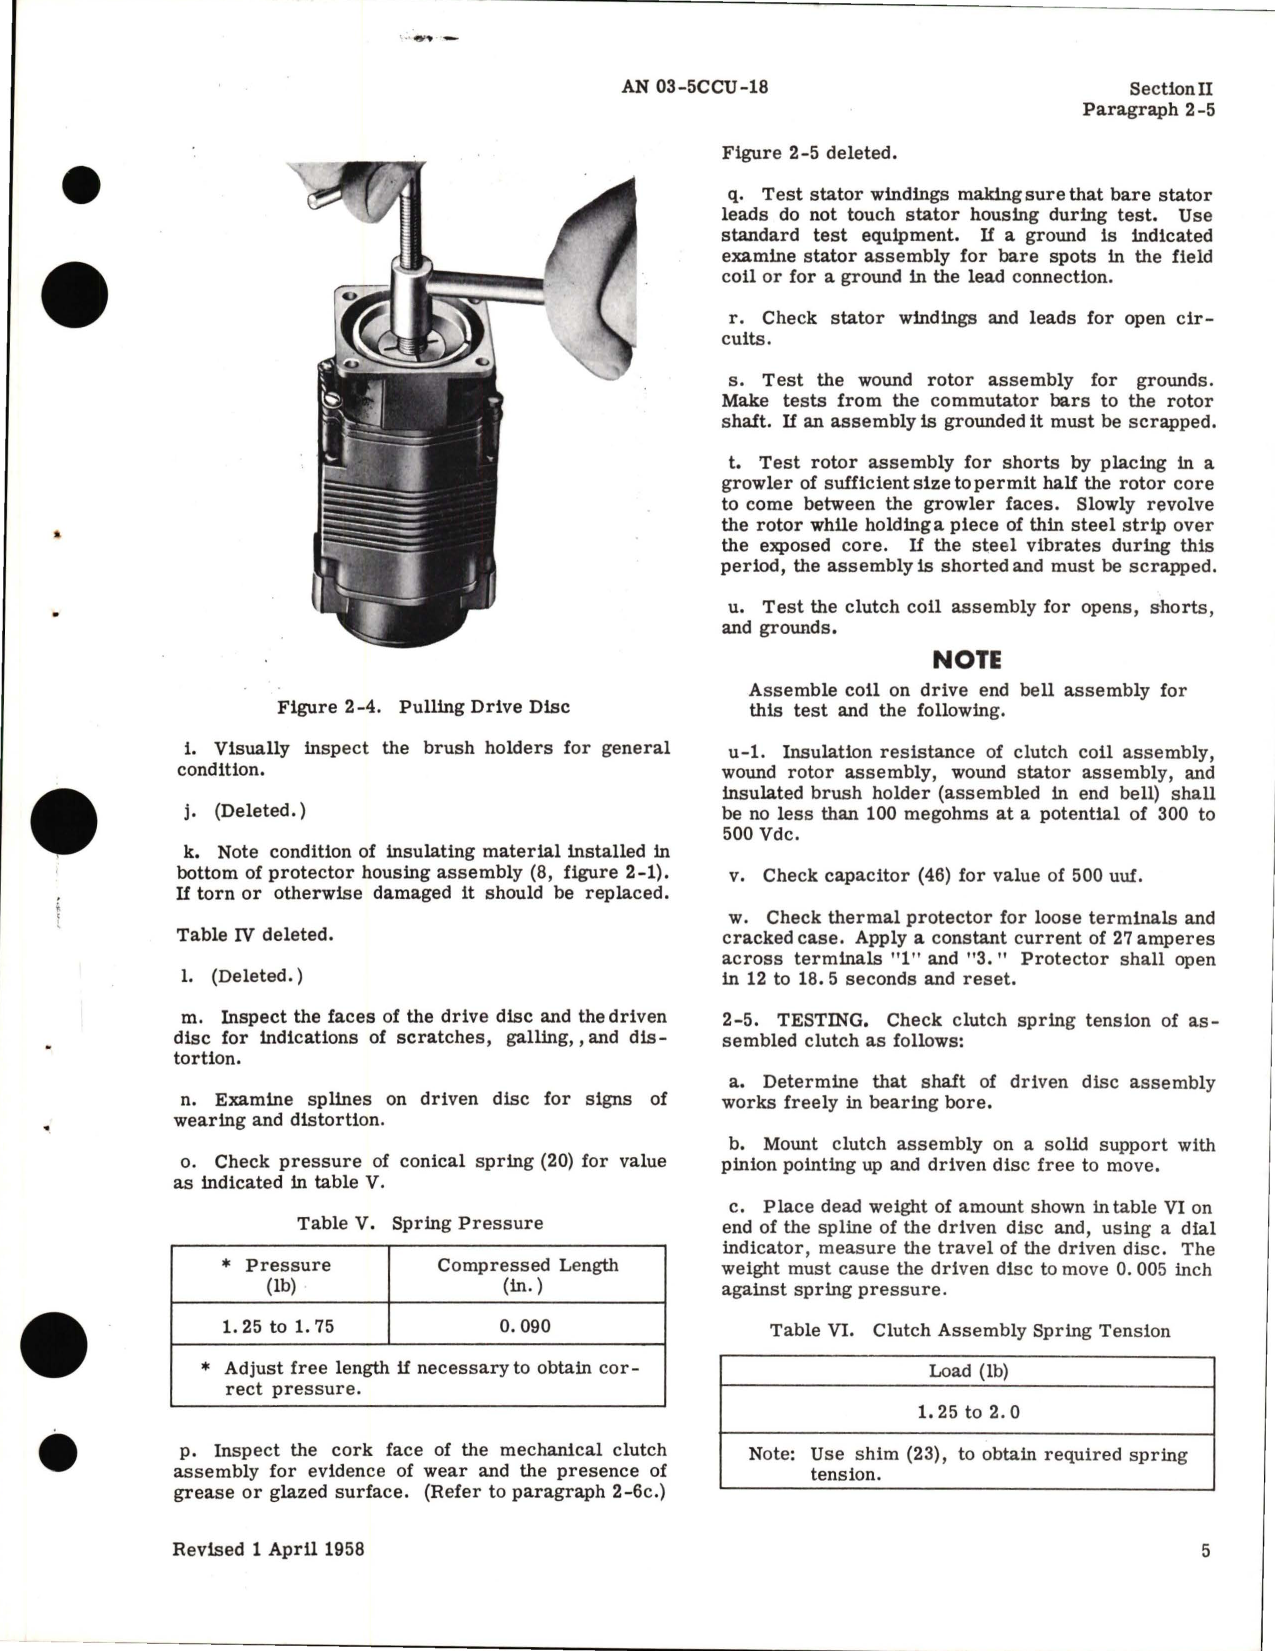 Sample page 9 from AirCorps Library document: Overhaul Instructions for Fractional Horsepower Electric Motors - C Frame Series 